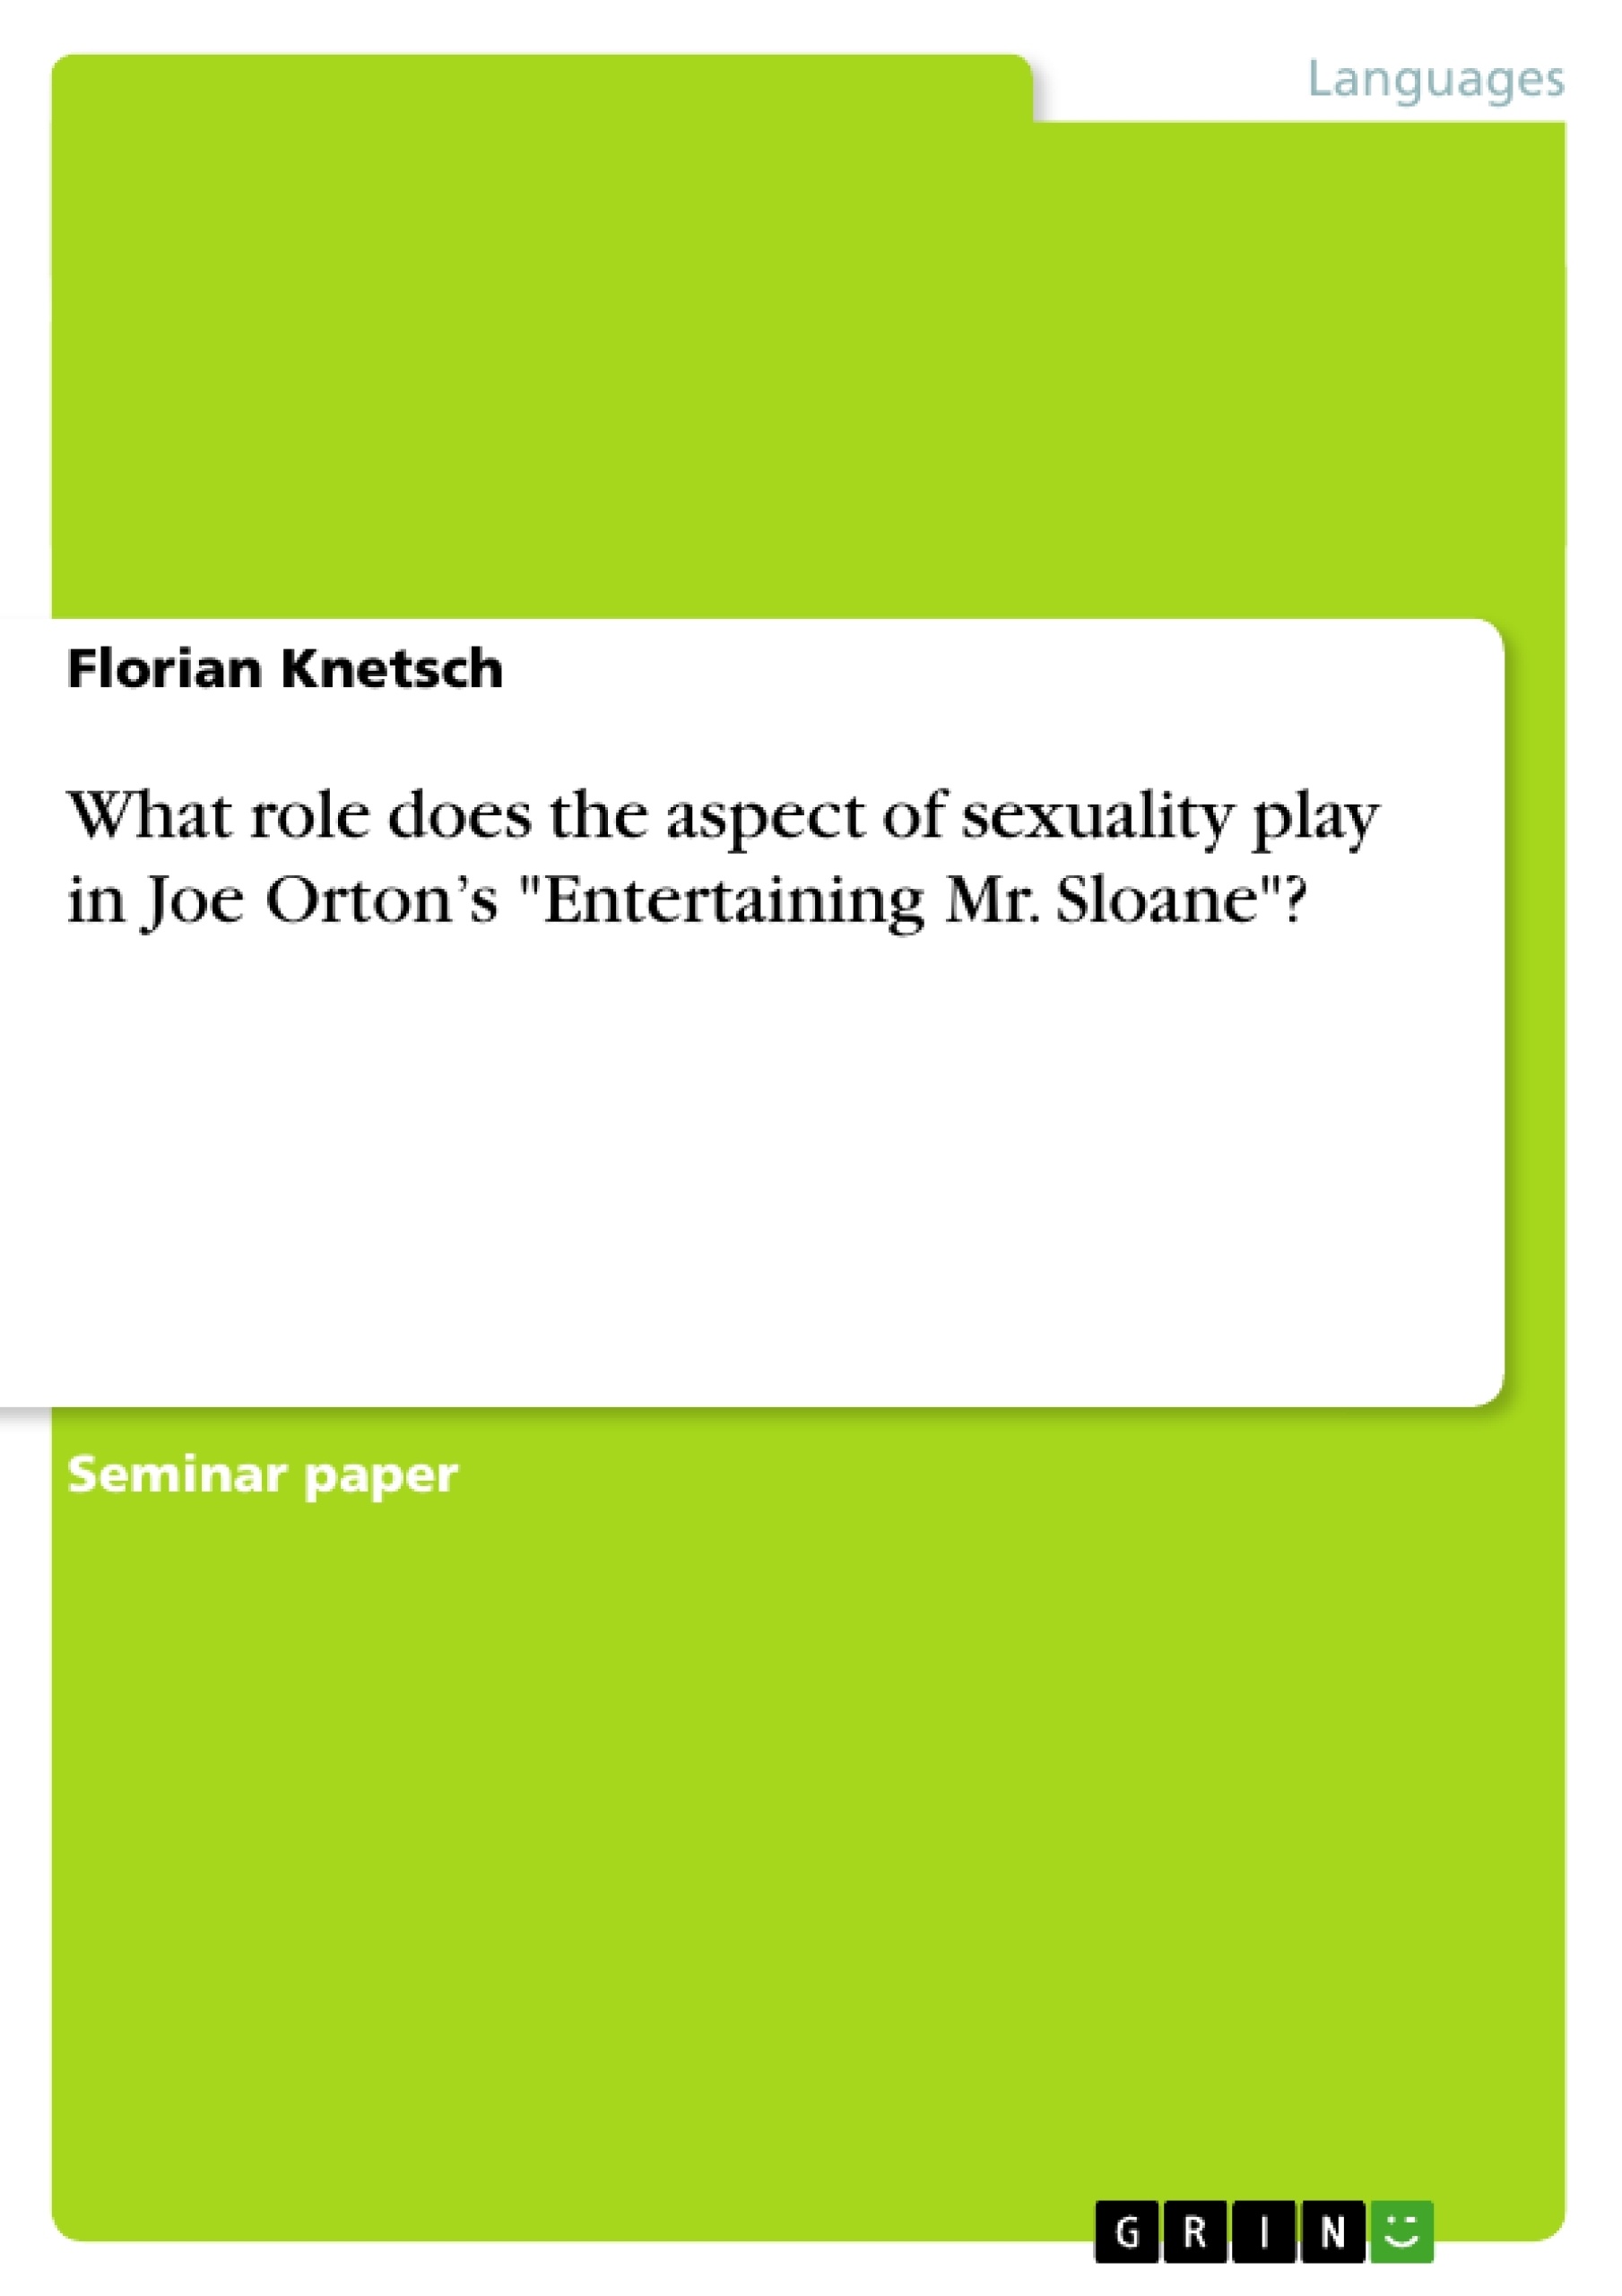 Titre: What role does the aspect of sexuality play in Joe Orton’s "Entertaining Mr. Sloane"?